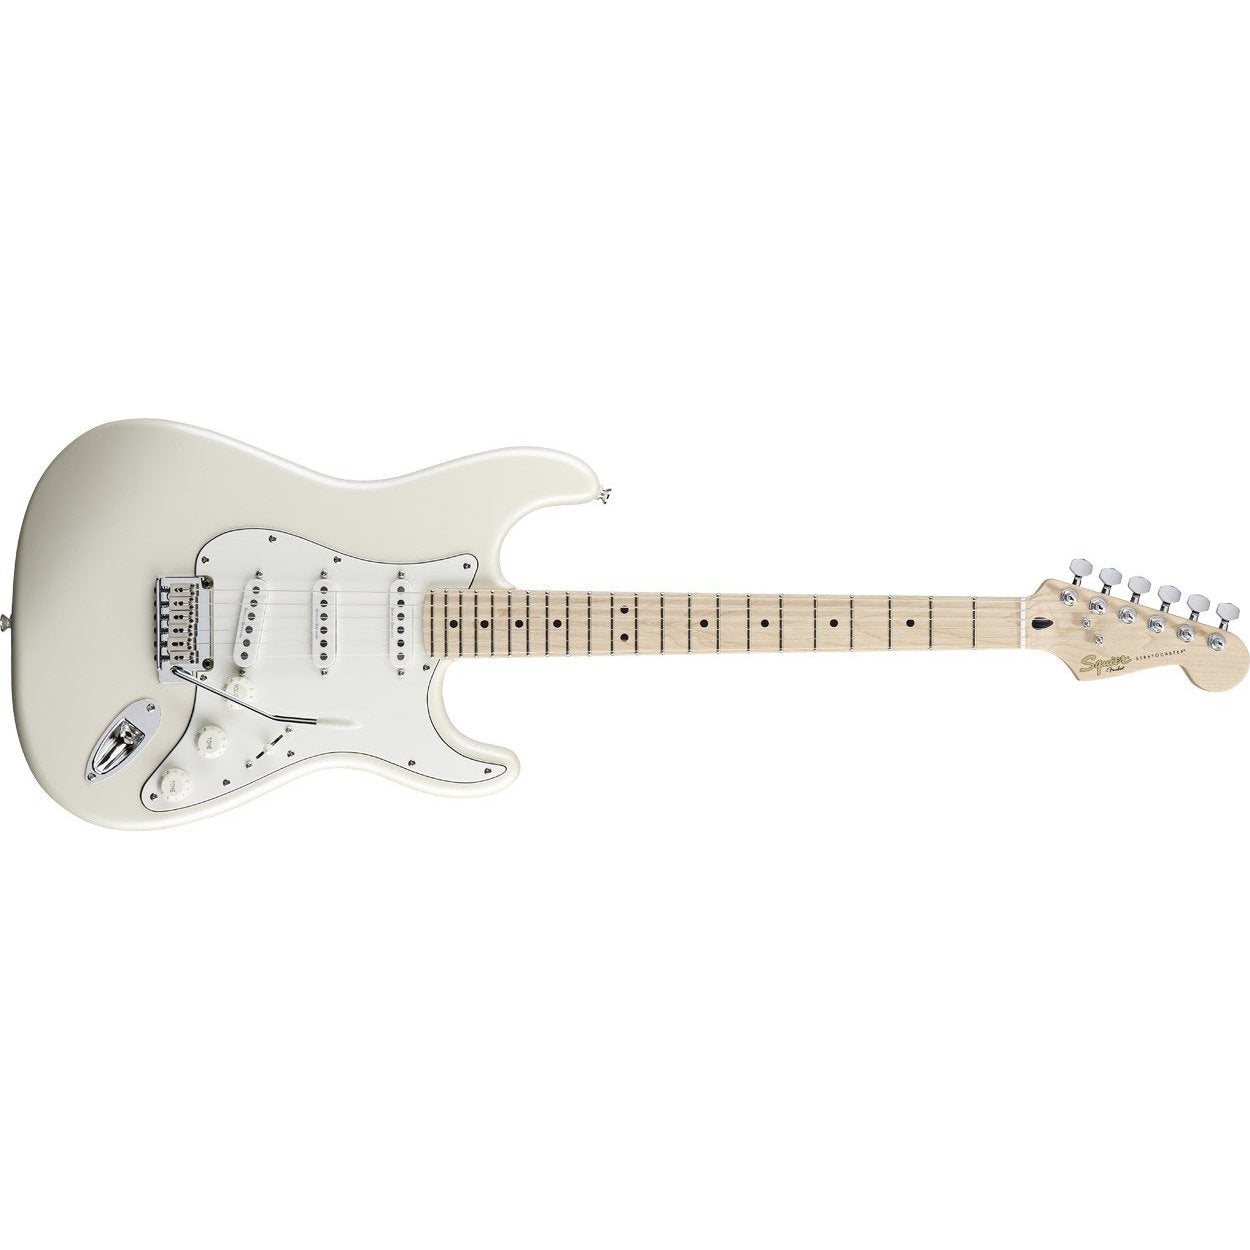 Fender Squier Deluxe Stratocaster Electric Guitar MN Pearl White Metallic (Discontinued)-Music World Academy